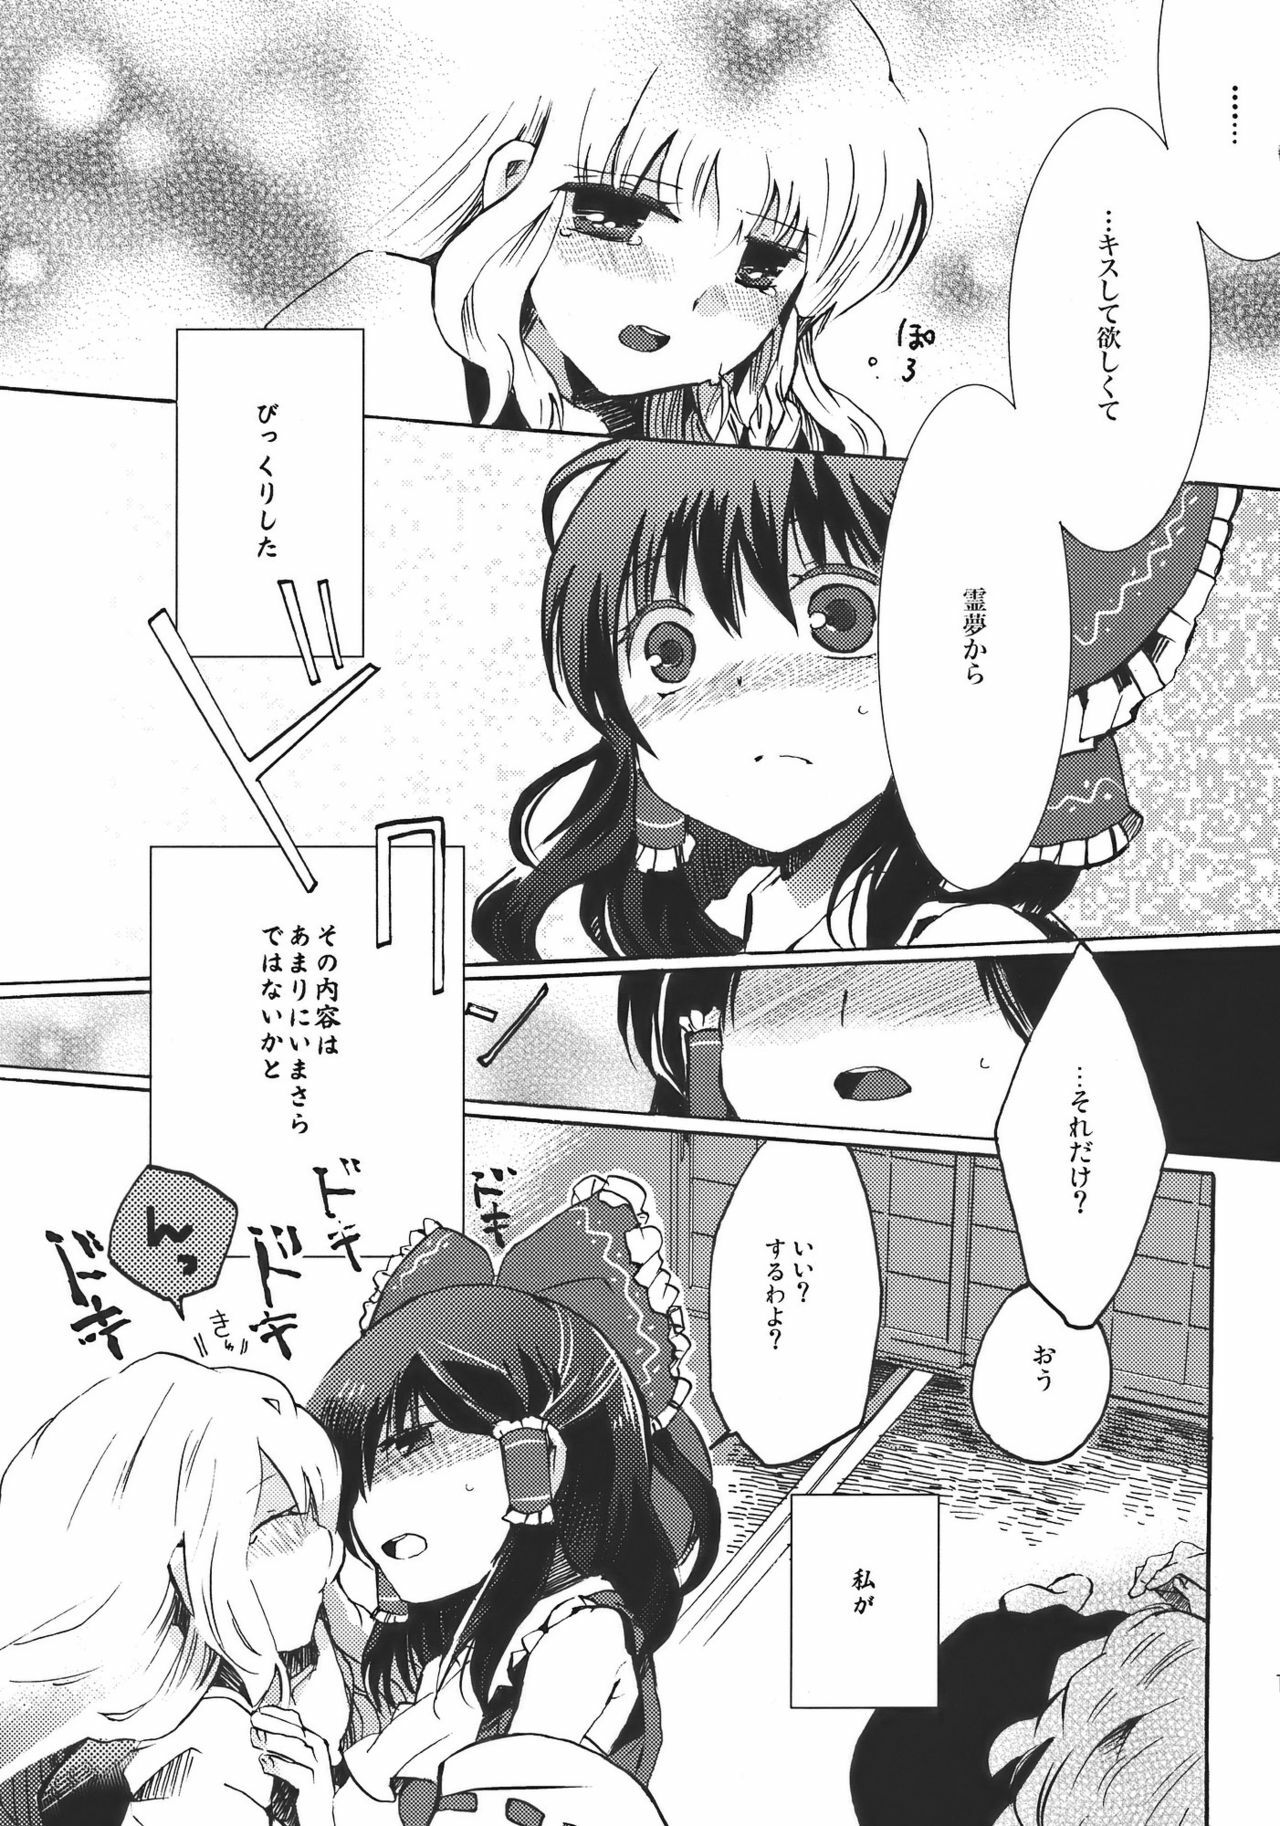 [Oimoto] Yumeiro Dolce (Touhou Project) page 15 full